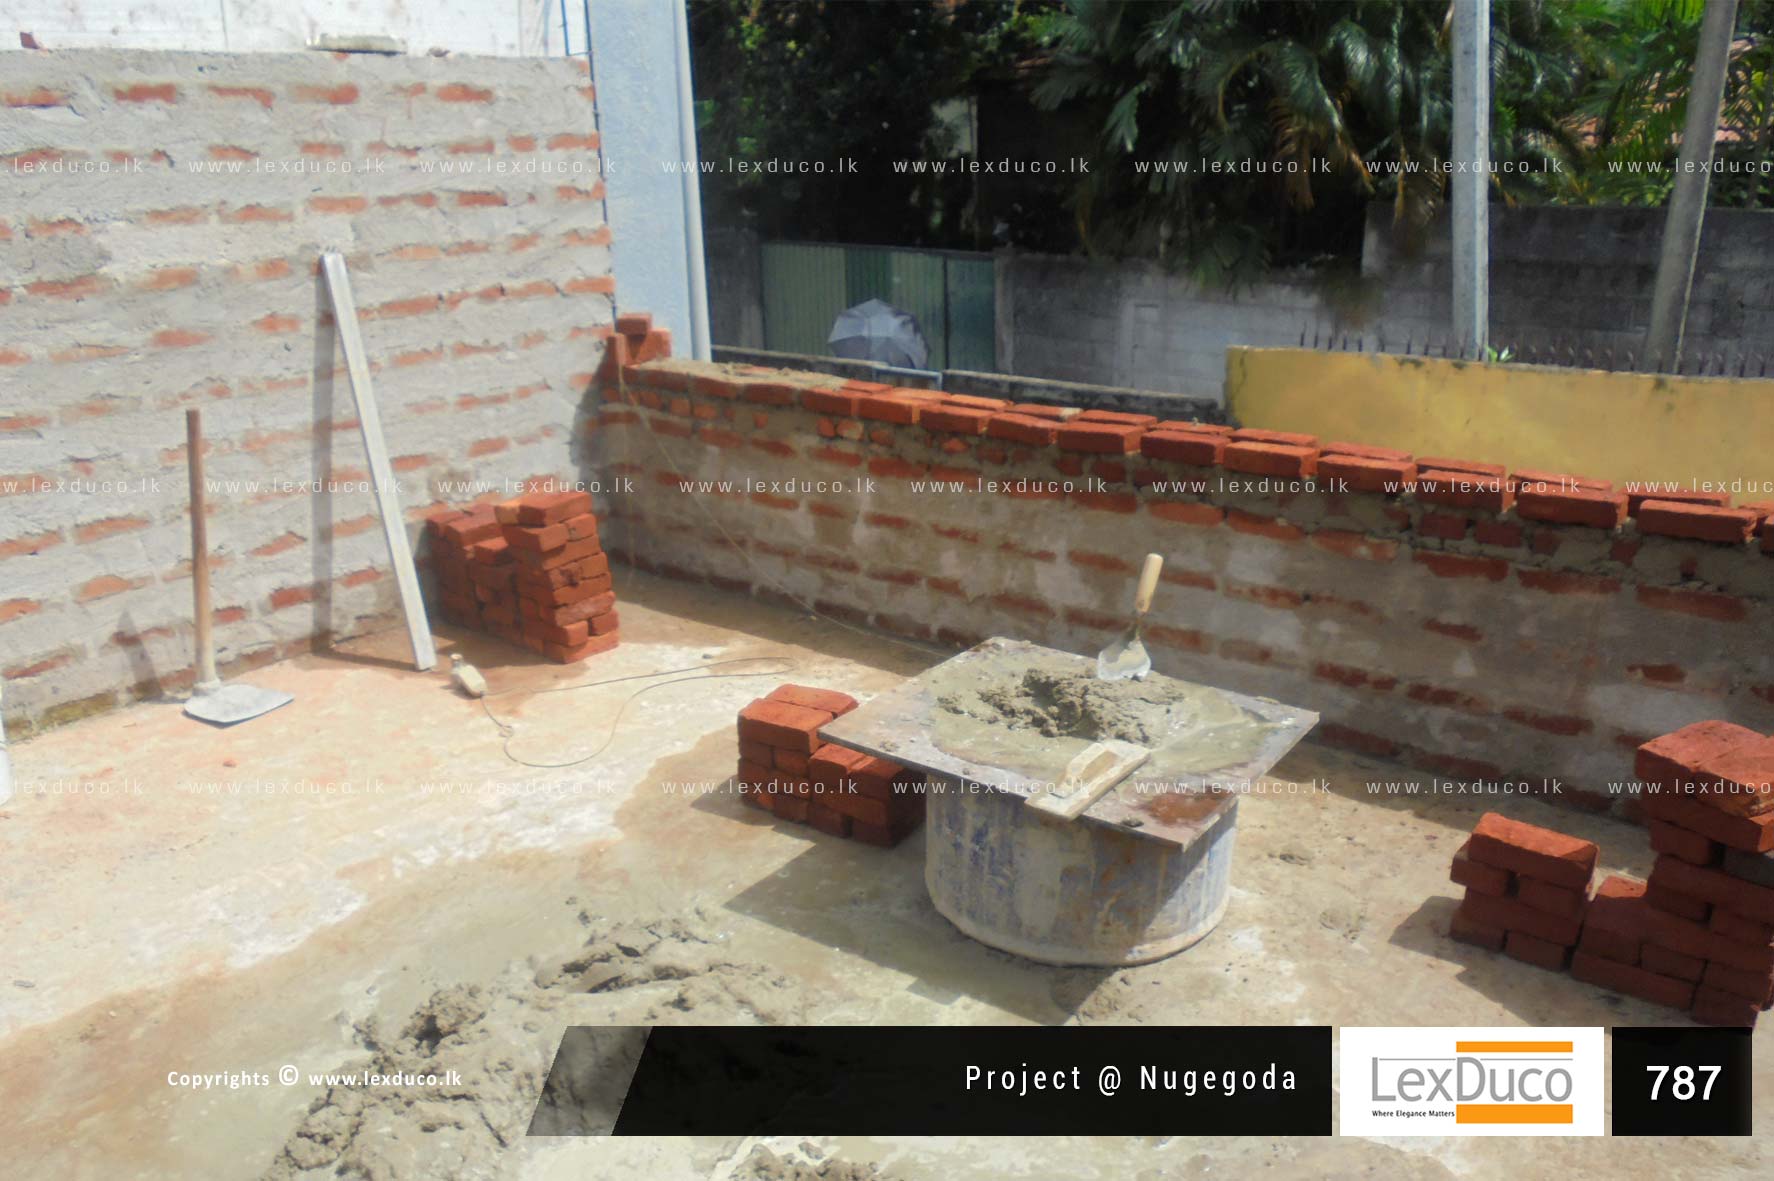 Residential Housing Project at Nugegoda | Lex Duco